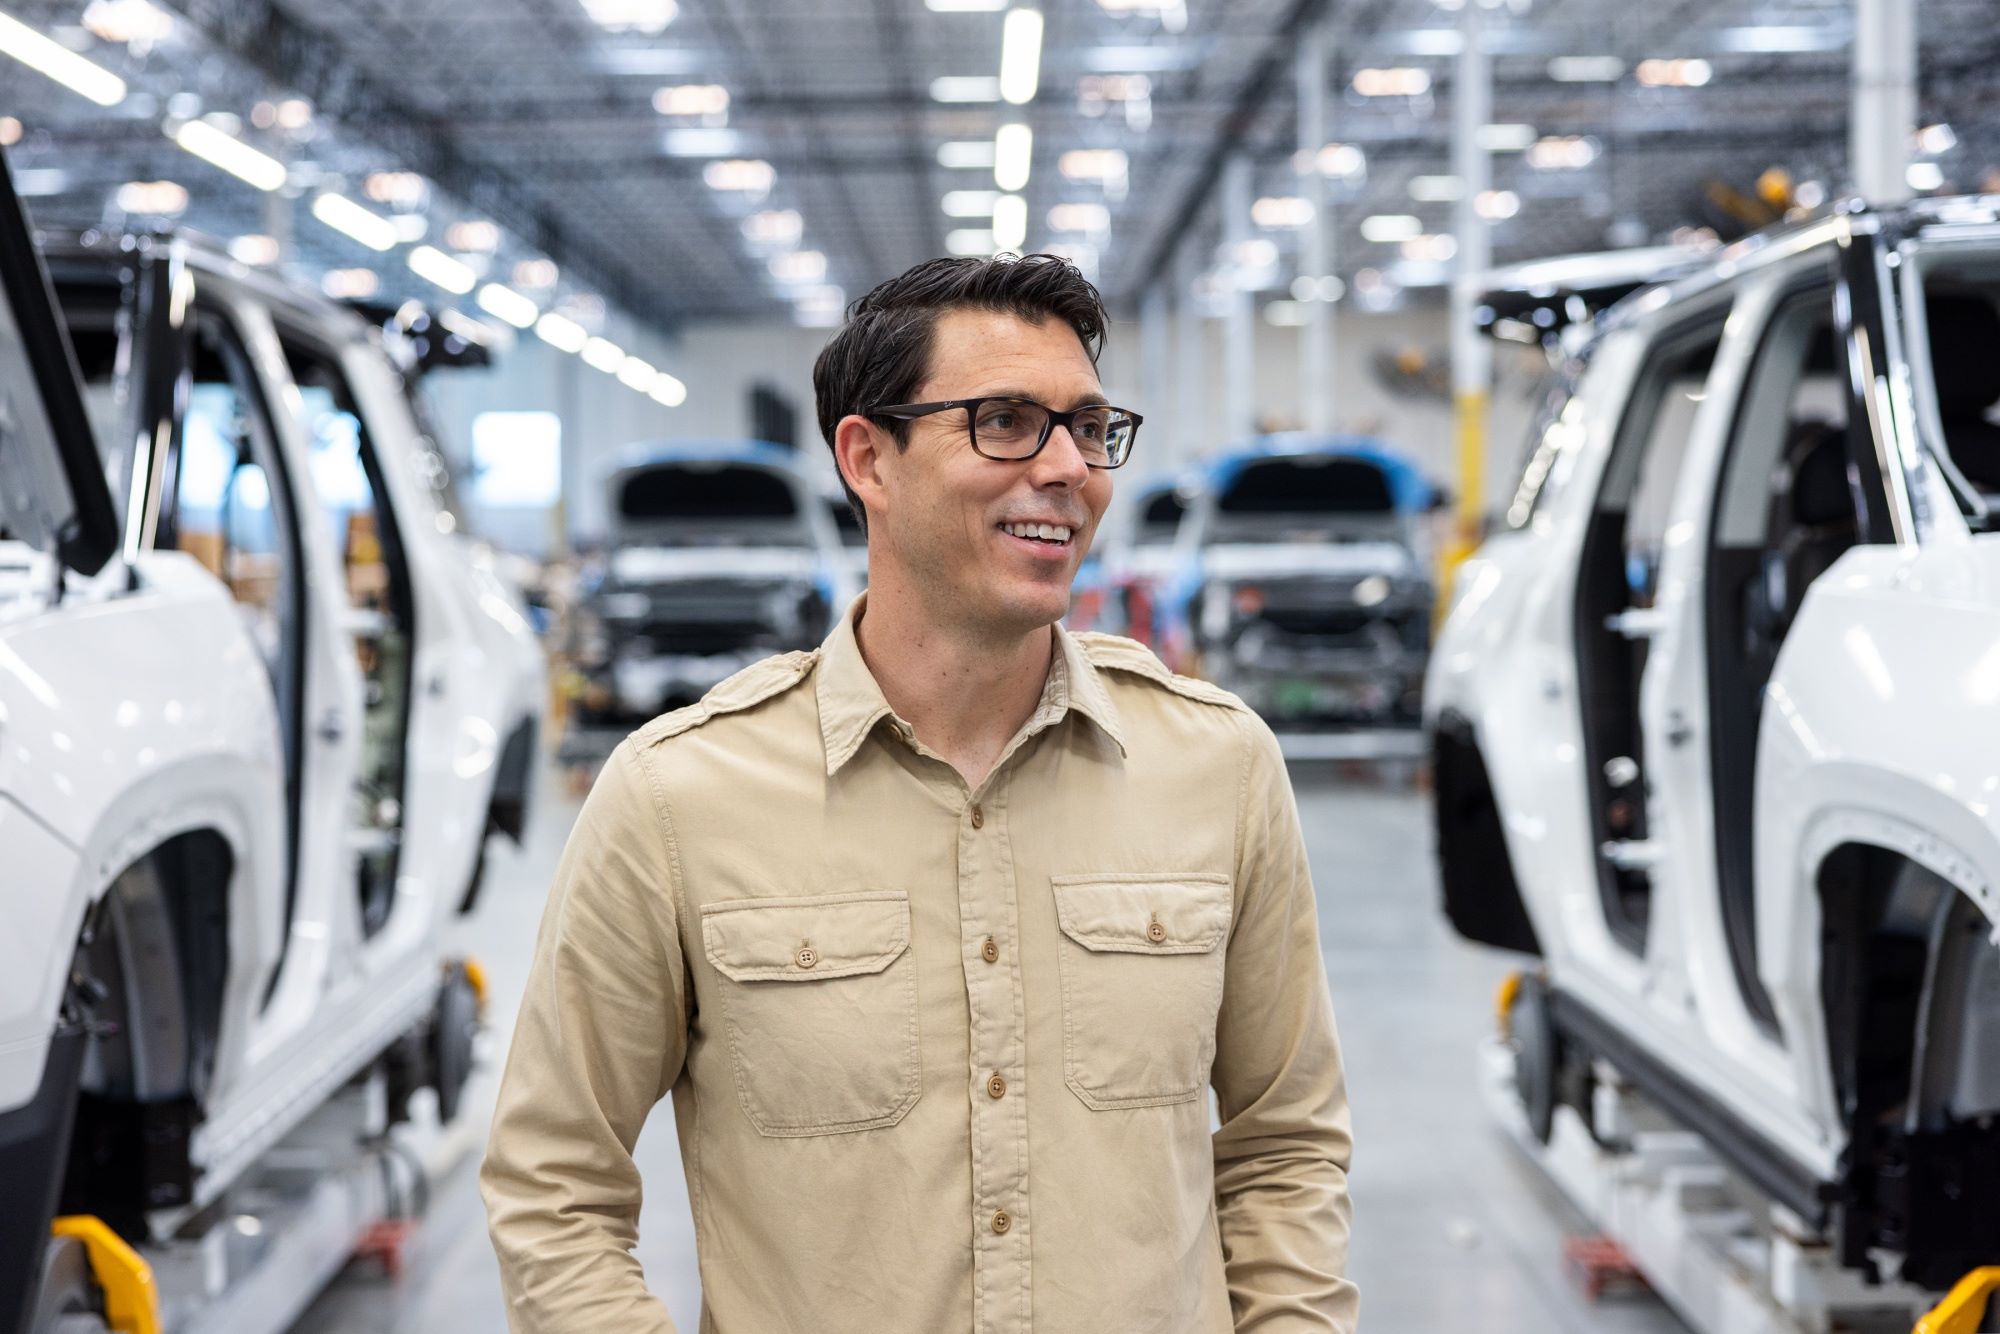 rivian-ceo-rj-scaringe-takes-on-top-product-role-at-ev-maker